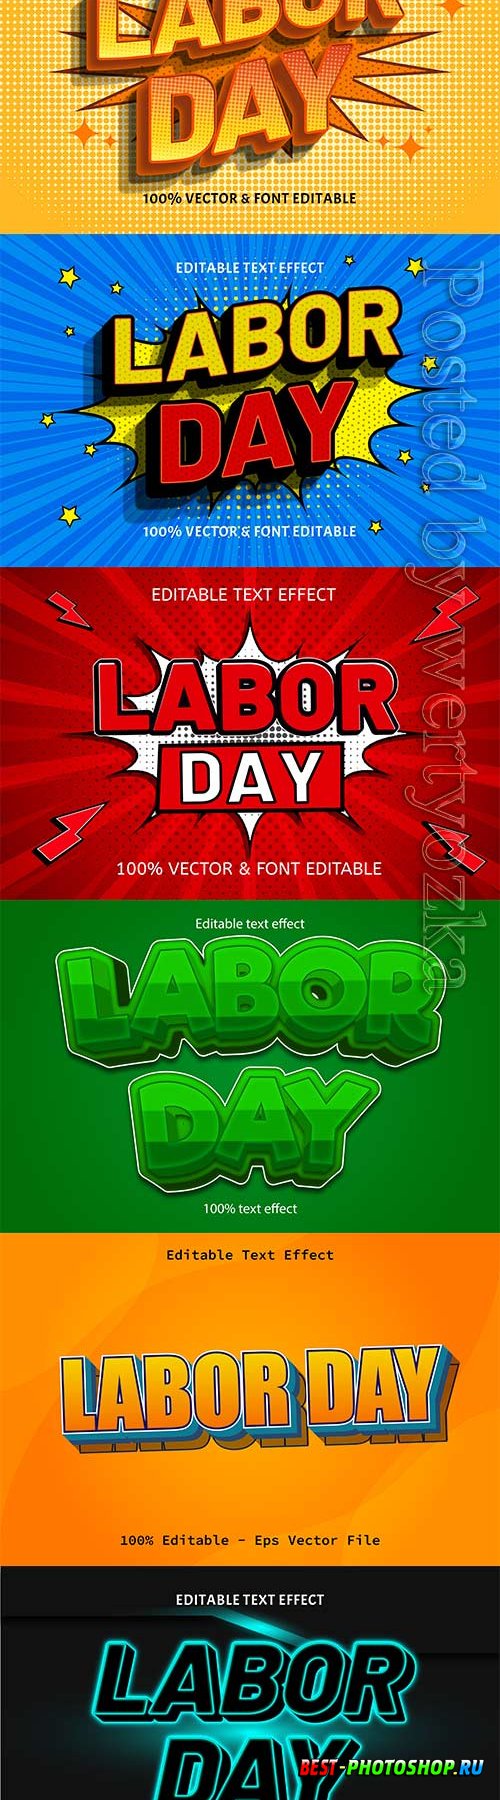 Labor day editable text effect vol 9